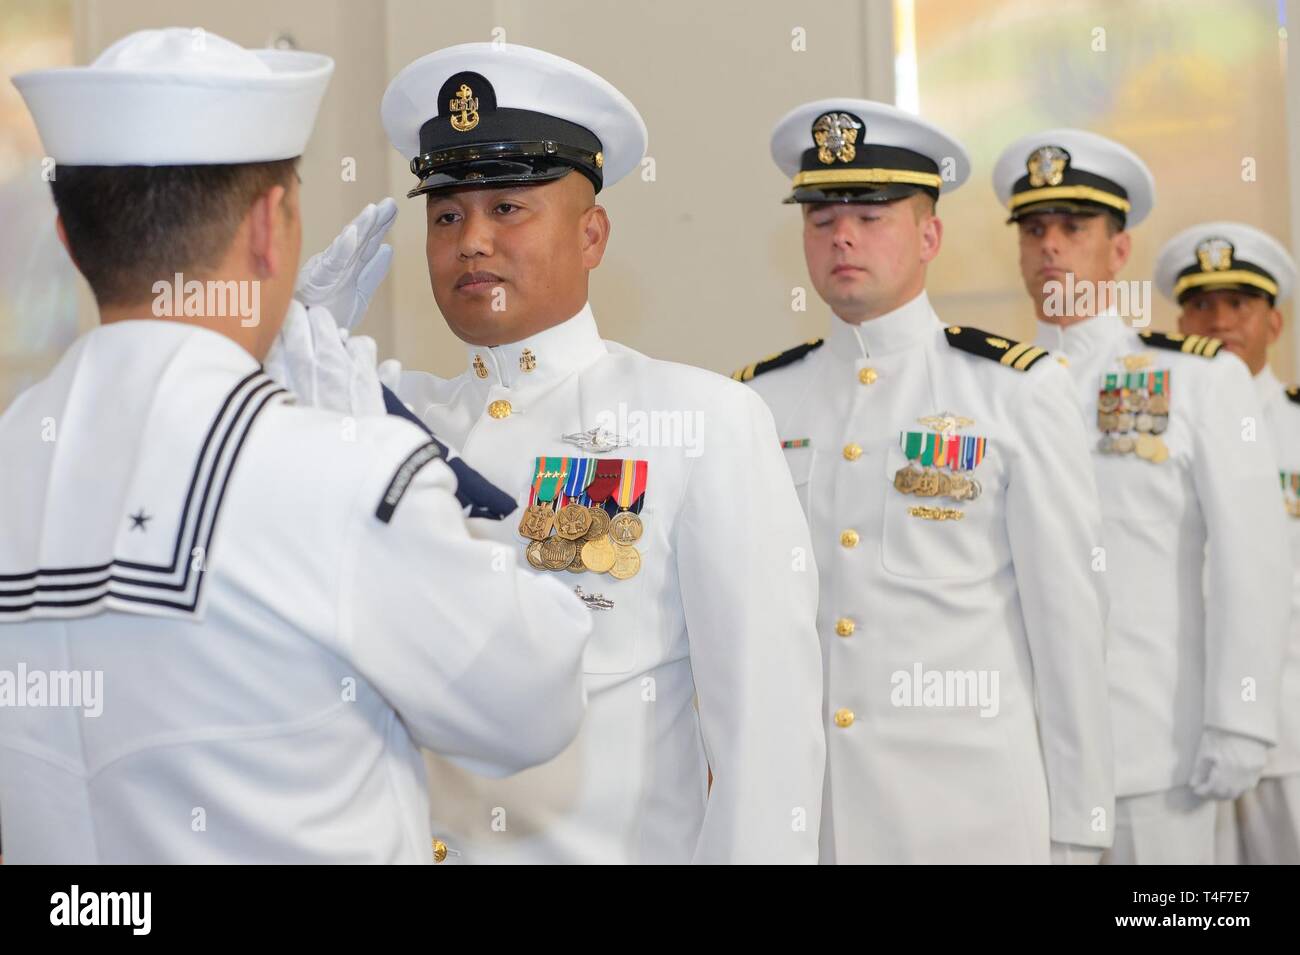 The Flag Detail passes the national ensign during the reading of 'Olde Glory' during Lt. Cmdr. Felix Villanueva’s retirement ceremony at the Chapel aboard Navy Station San Diego. Lt. Cmdr. Villanueva assigned to Navy Medicine West concluded a 28 year career on 11 April 2019 in a small ceremony surround by his family, friends, and closest colleagues. Stock Photo